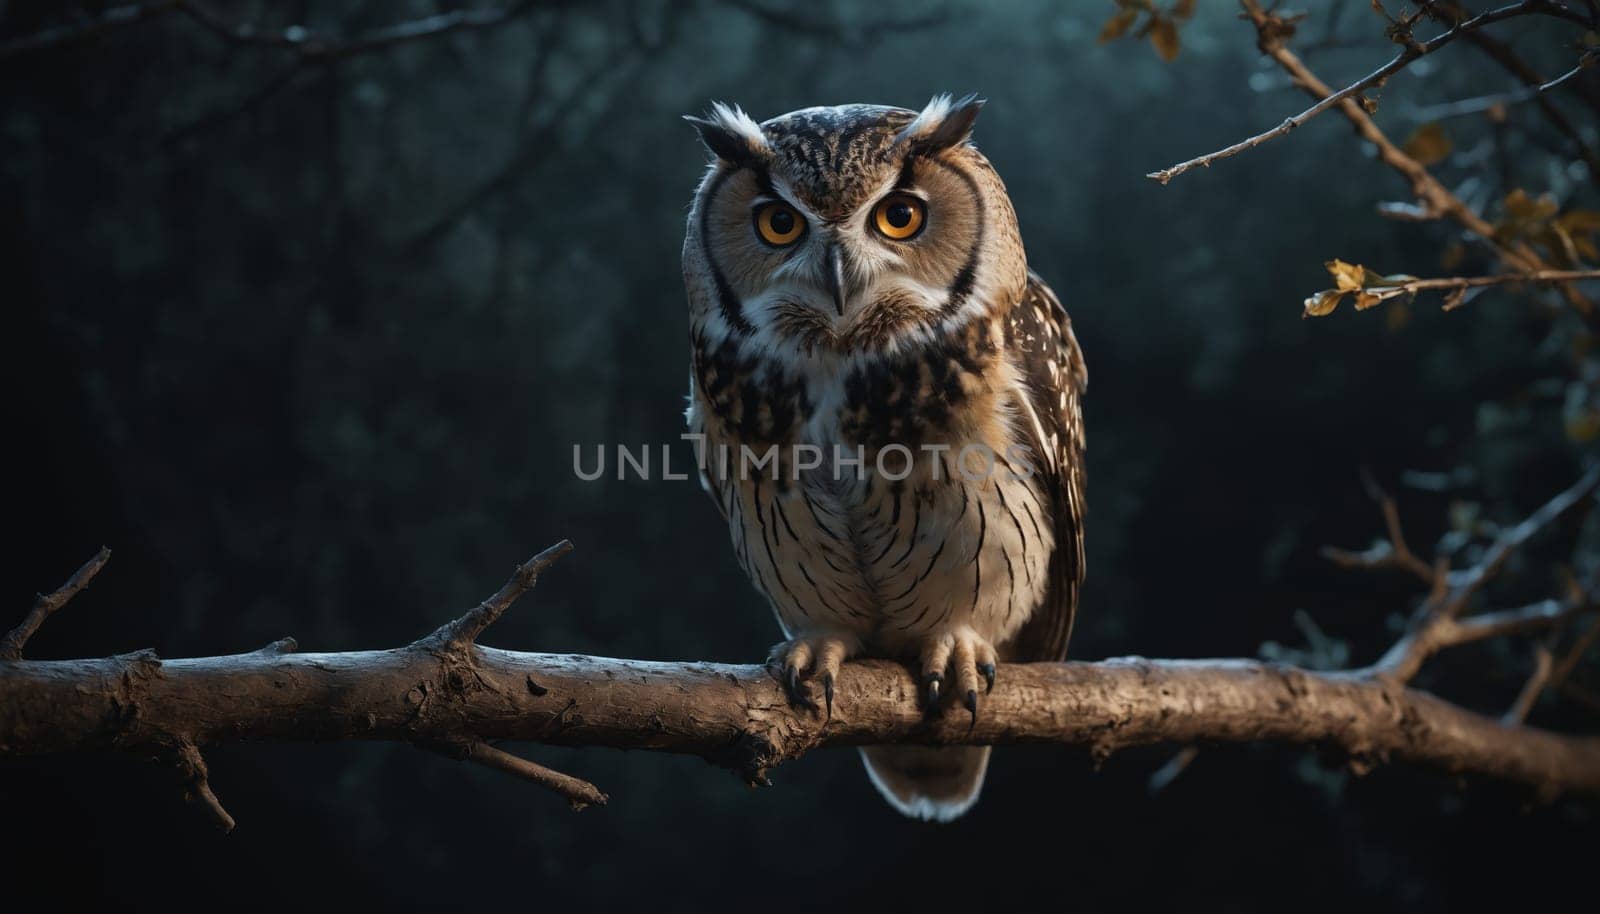 An owl with piercing yellow eyes rests on a branch in a dark, mysterious forest. The owl's plumage is a mix of brown, grey, and black, blending seamlessly with the shadowy background. The air is still, and the only sound is the owl's soft breathing.